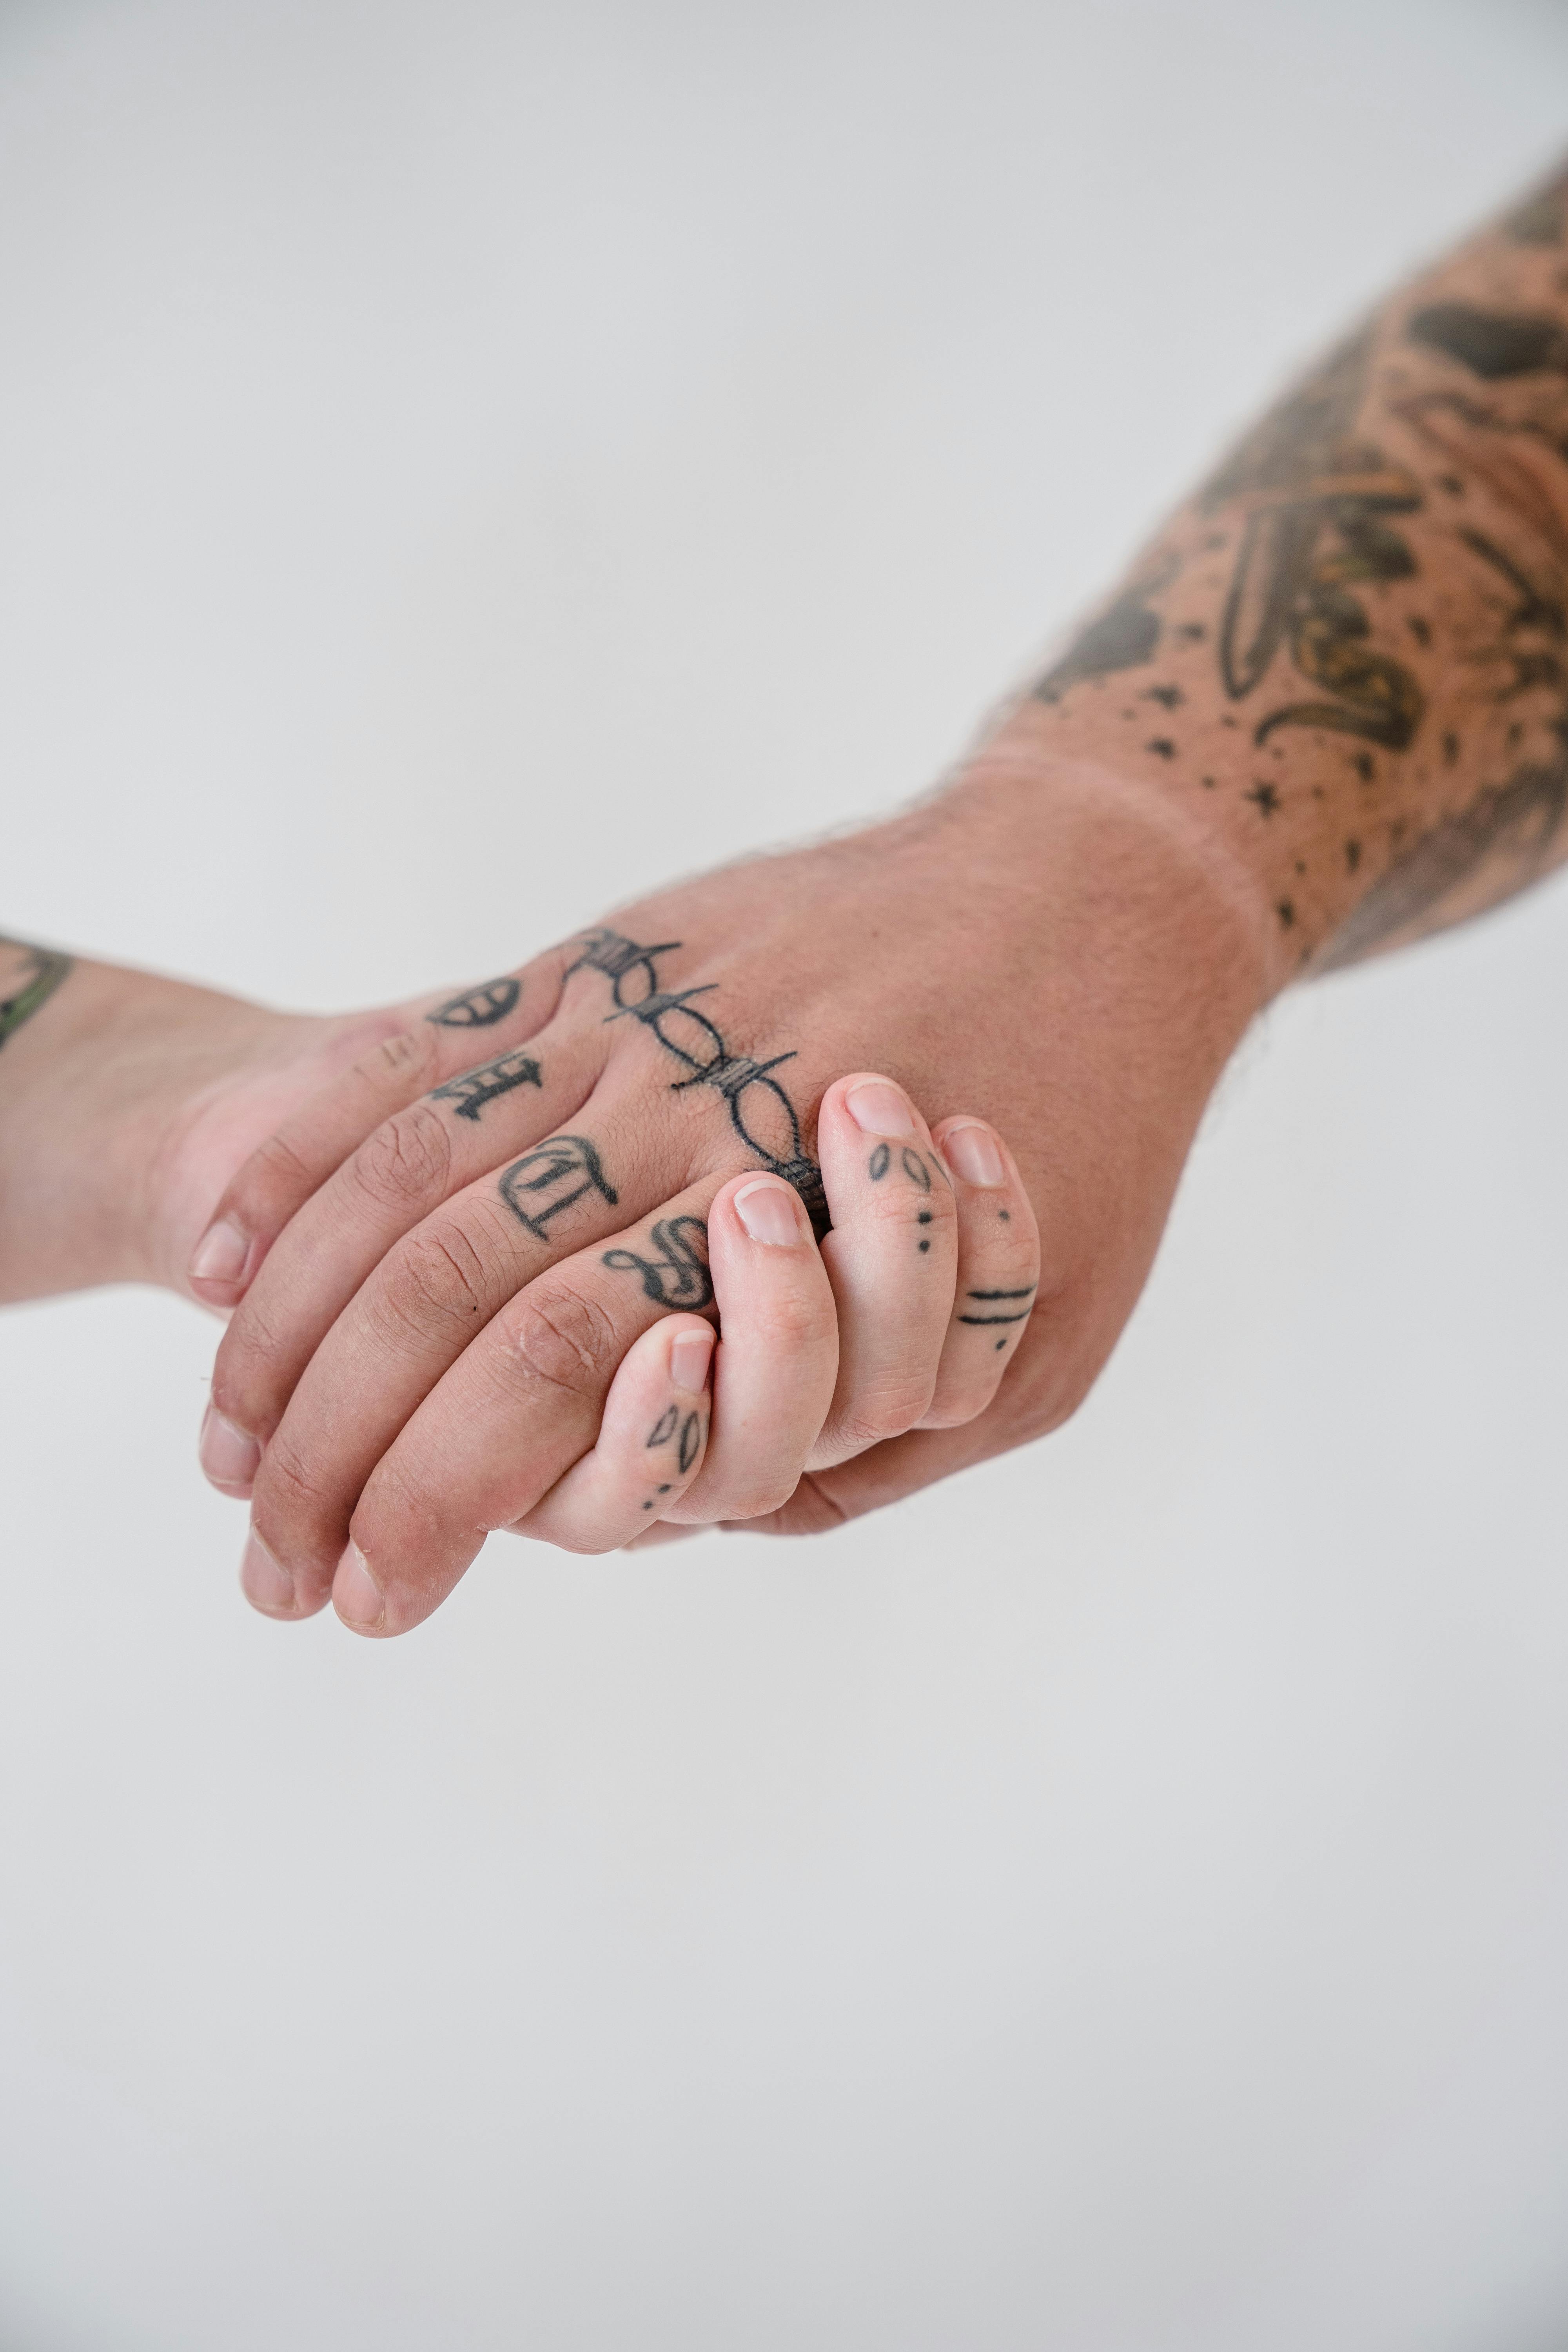 63 Holding Hands Tattoo Ideas That You Wont Regret  Tattoo Glee